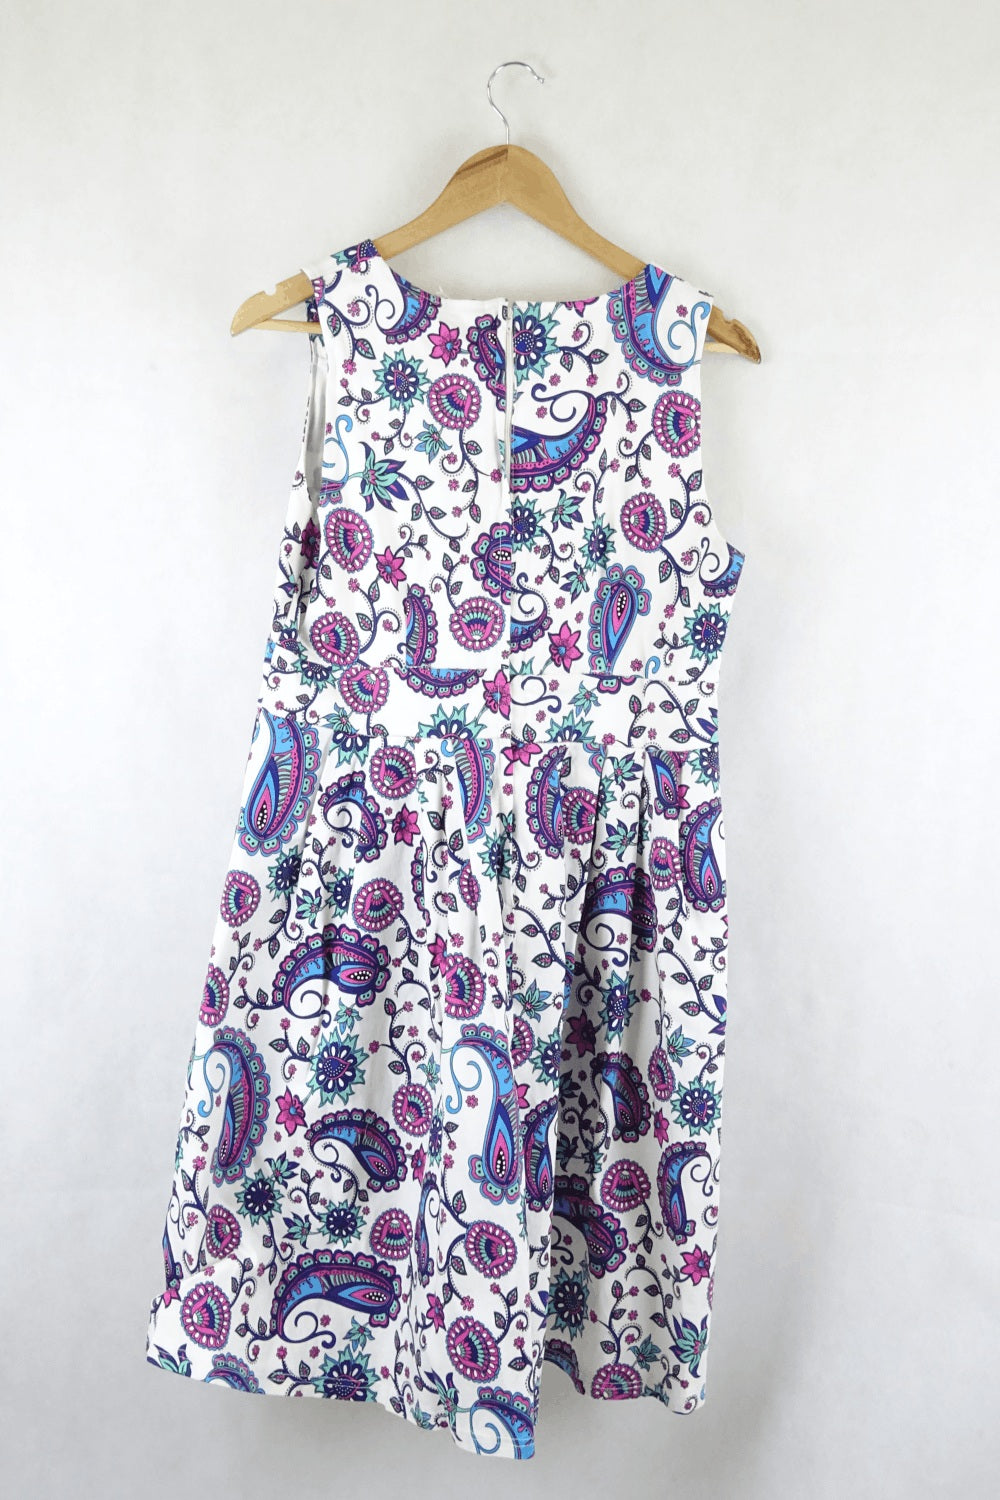 Filo Floral Dress Pink And White 14